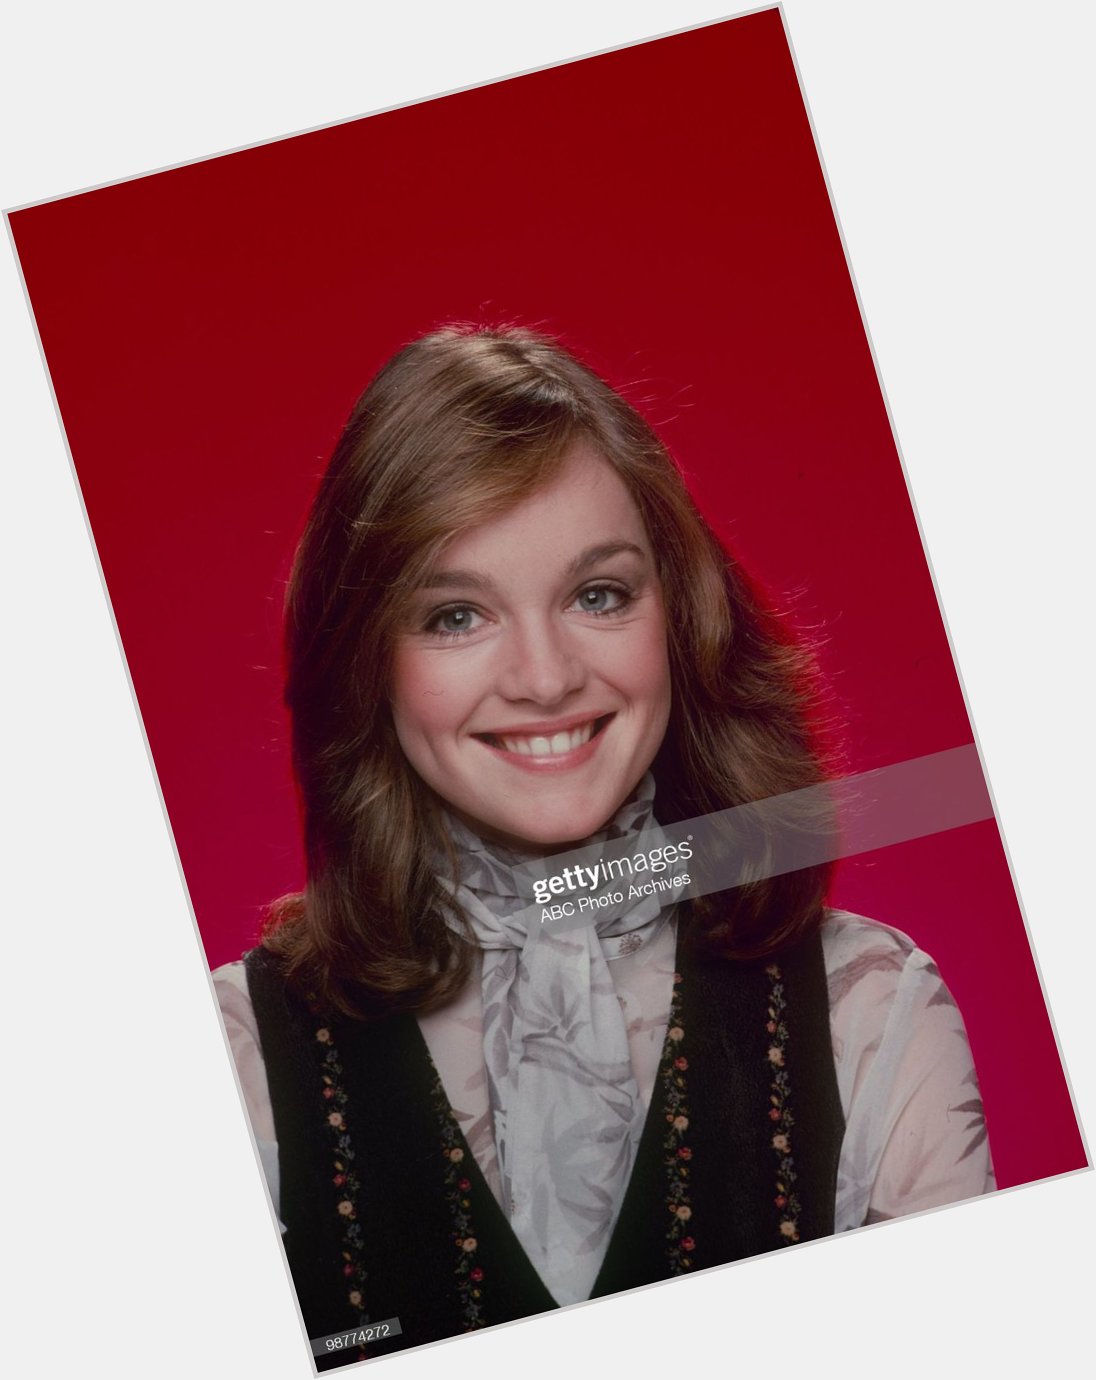 Happy birthday, pamela sue martin! I love her so much with all my heart, I hope she is having an amazing day.  